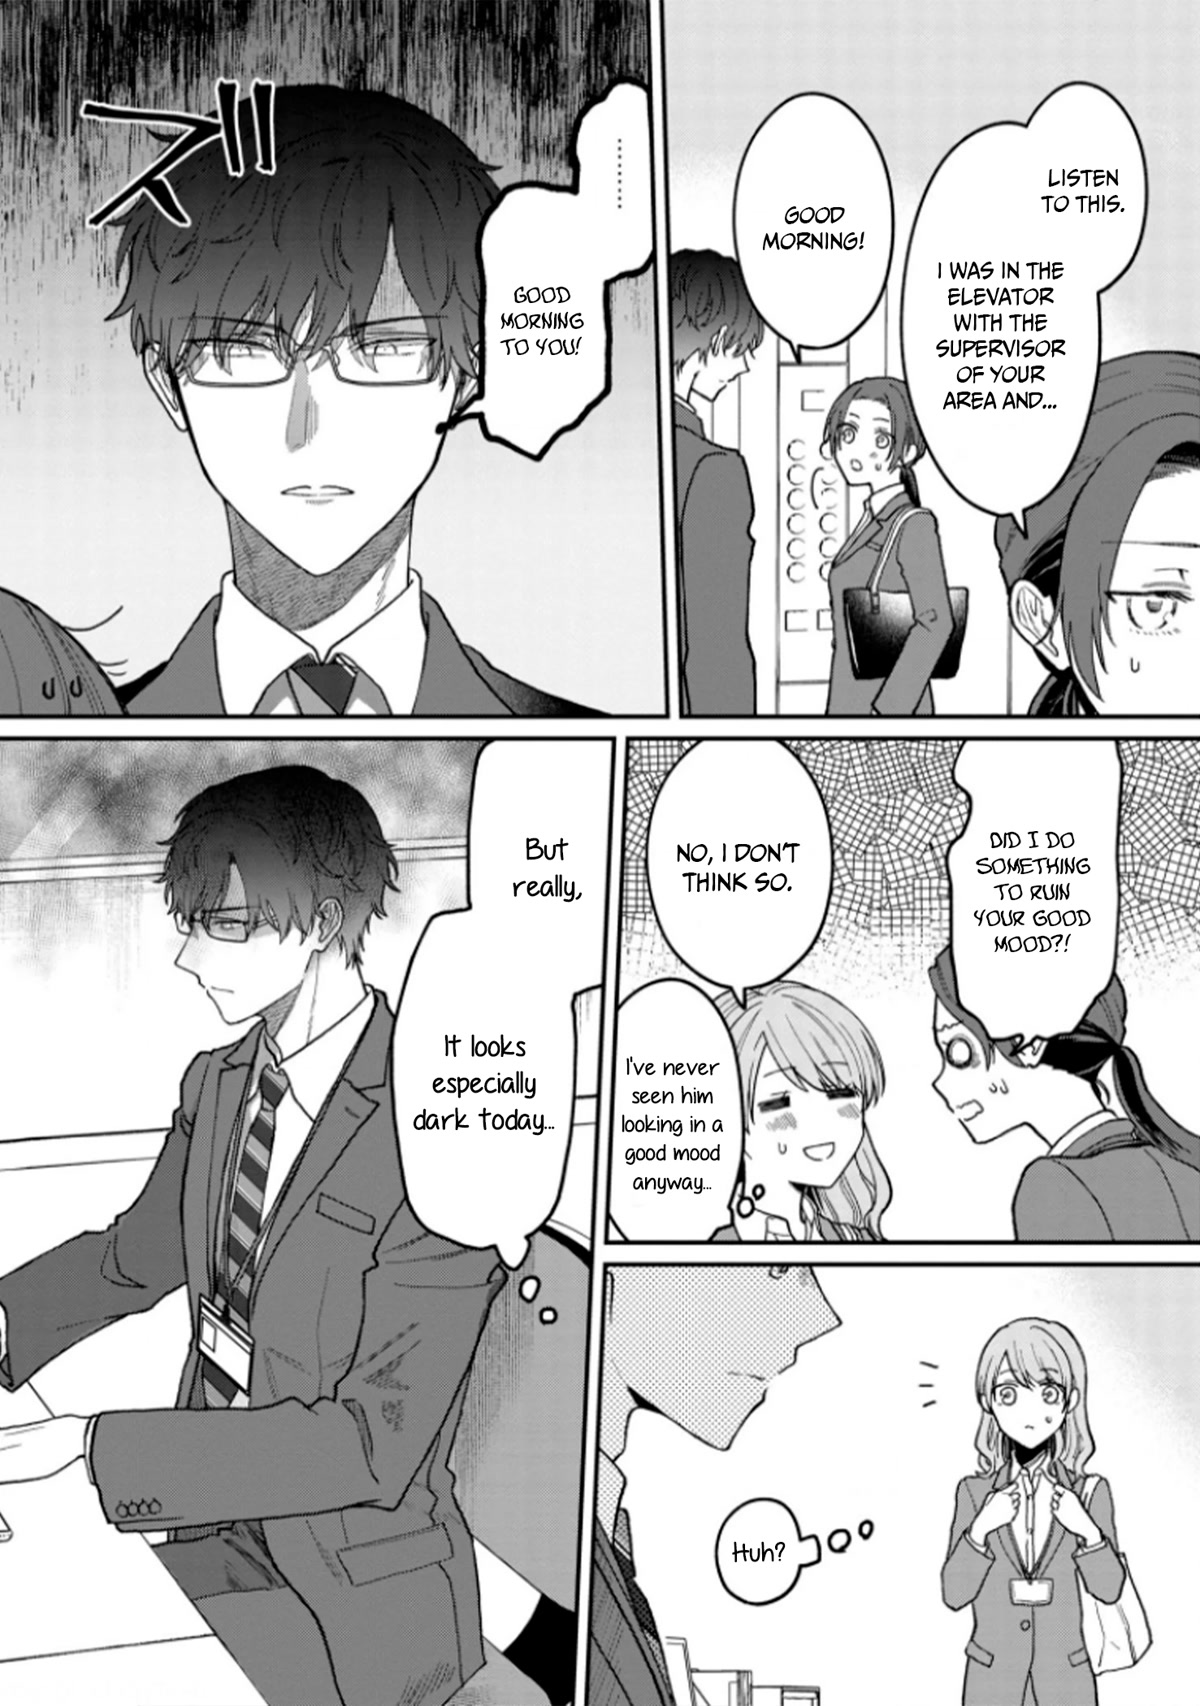 The New-Hire Who Could "Read" Emotions and the Unsociable Senpai - chapter 2 - #2